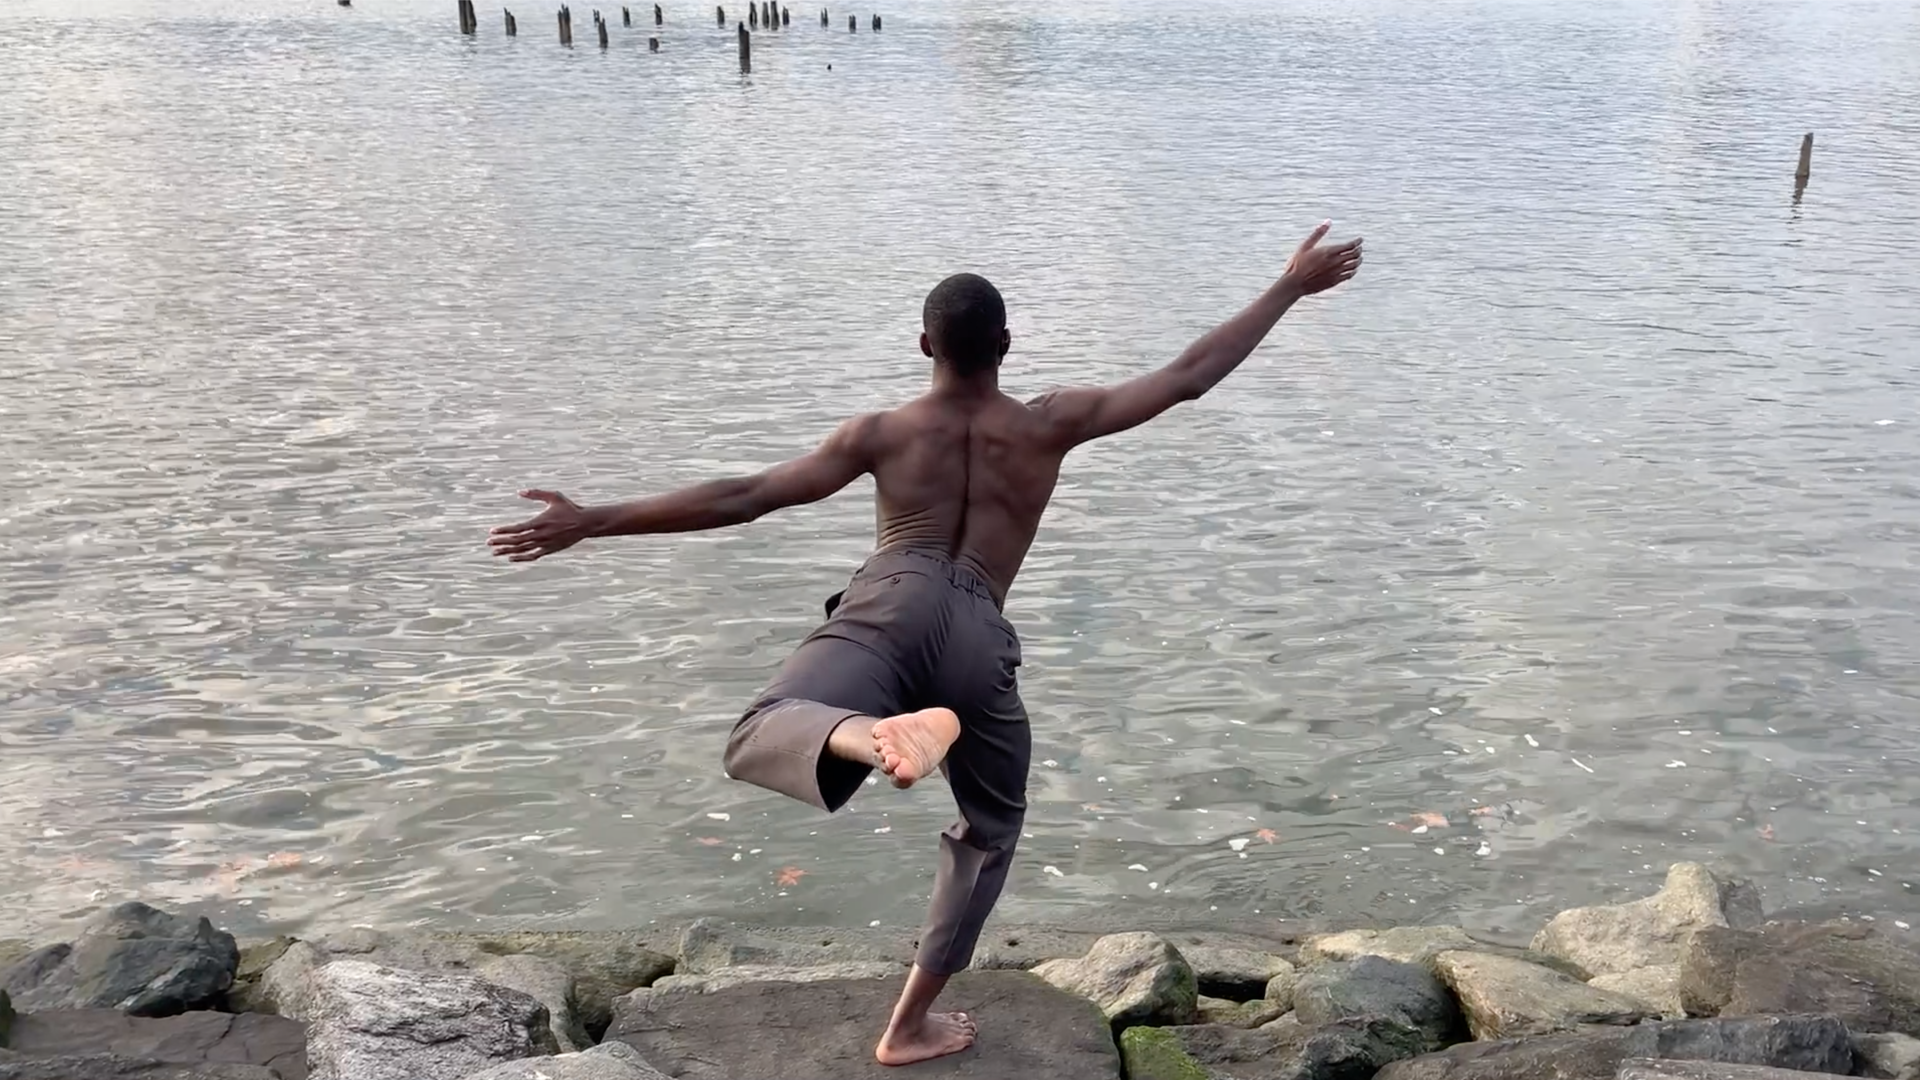 A dancer stands on the shore of a body of water, arms outstretched and with one leg raised, looking as though he might dive in